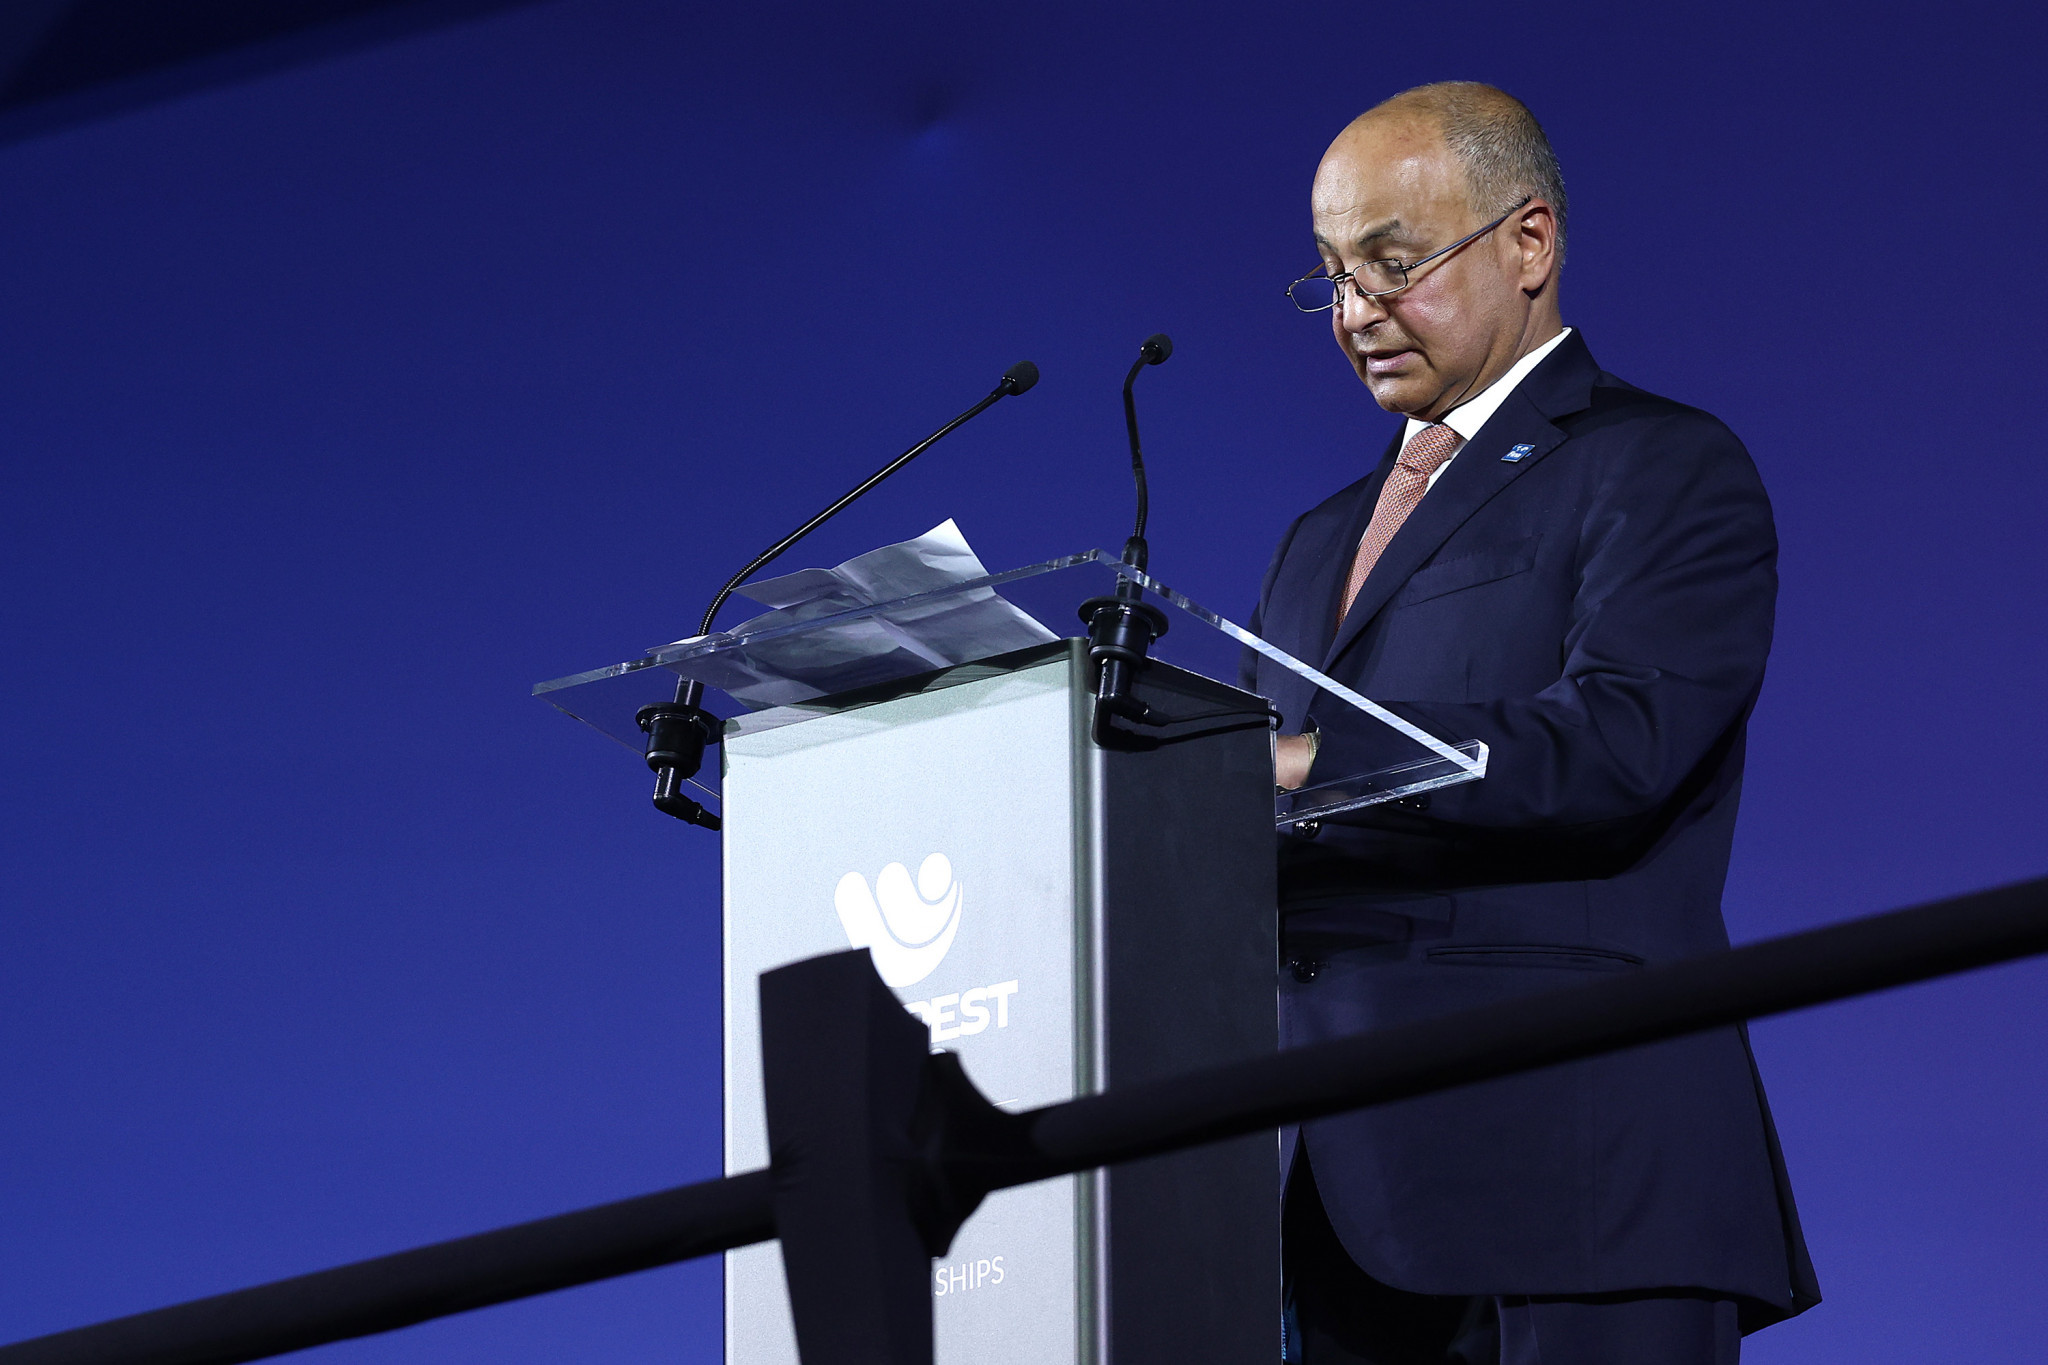 FINA President Husain Al-Musallam told the crowd at the Closing Ceremony that Budapest had been the "perfect host" for the World Championships ©Getty Images